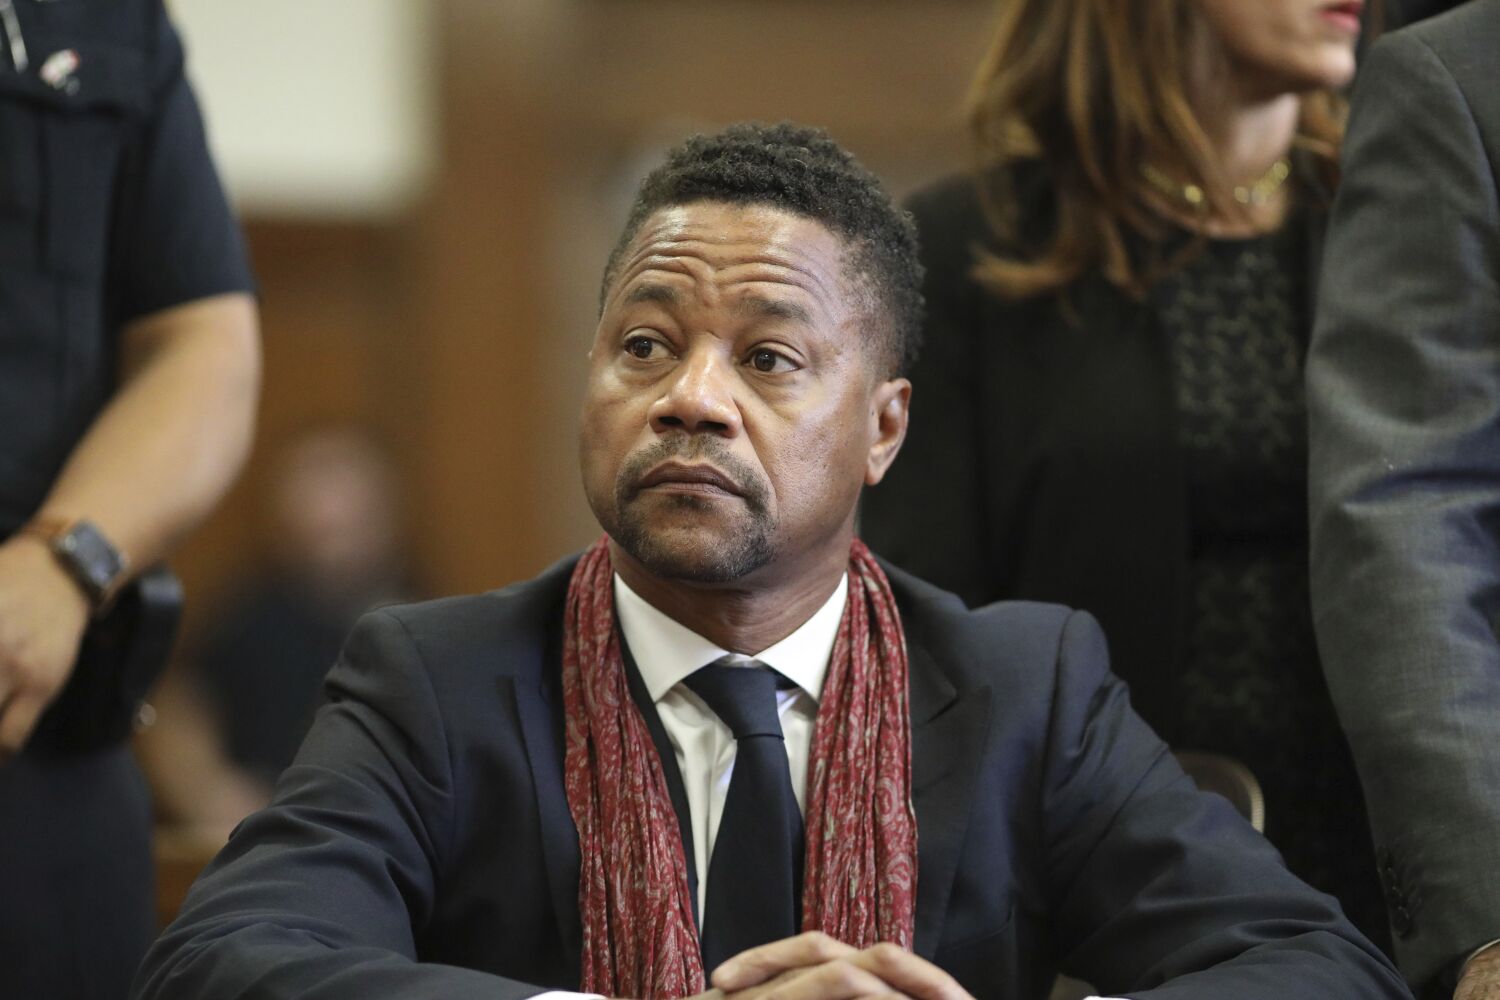 Cuba Gooding Jr. settles with accuser, avoids trial in New York sexual assault case